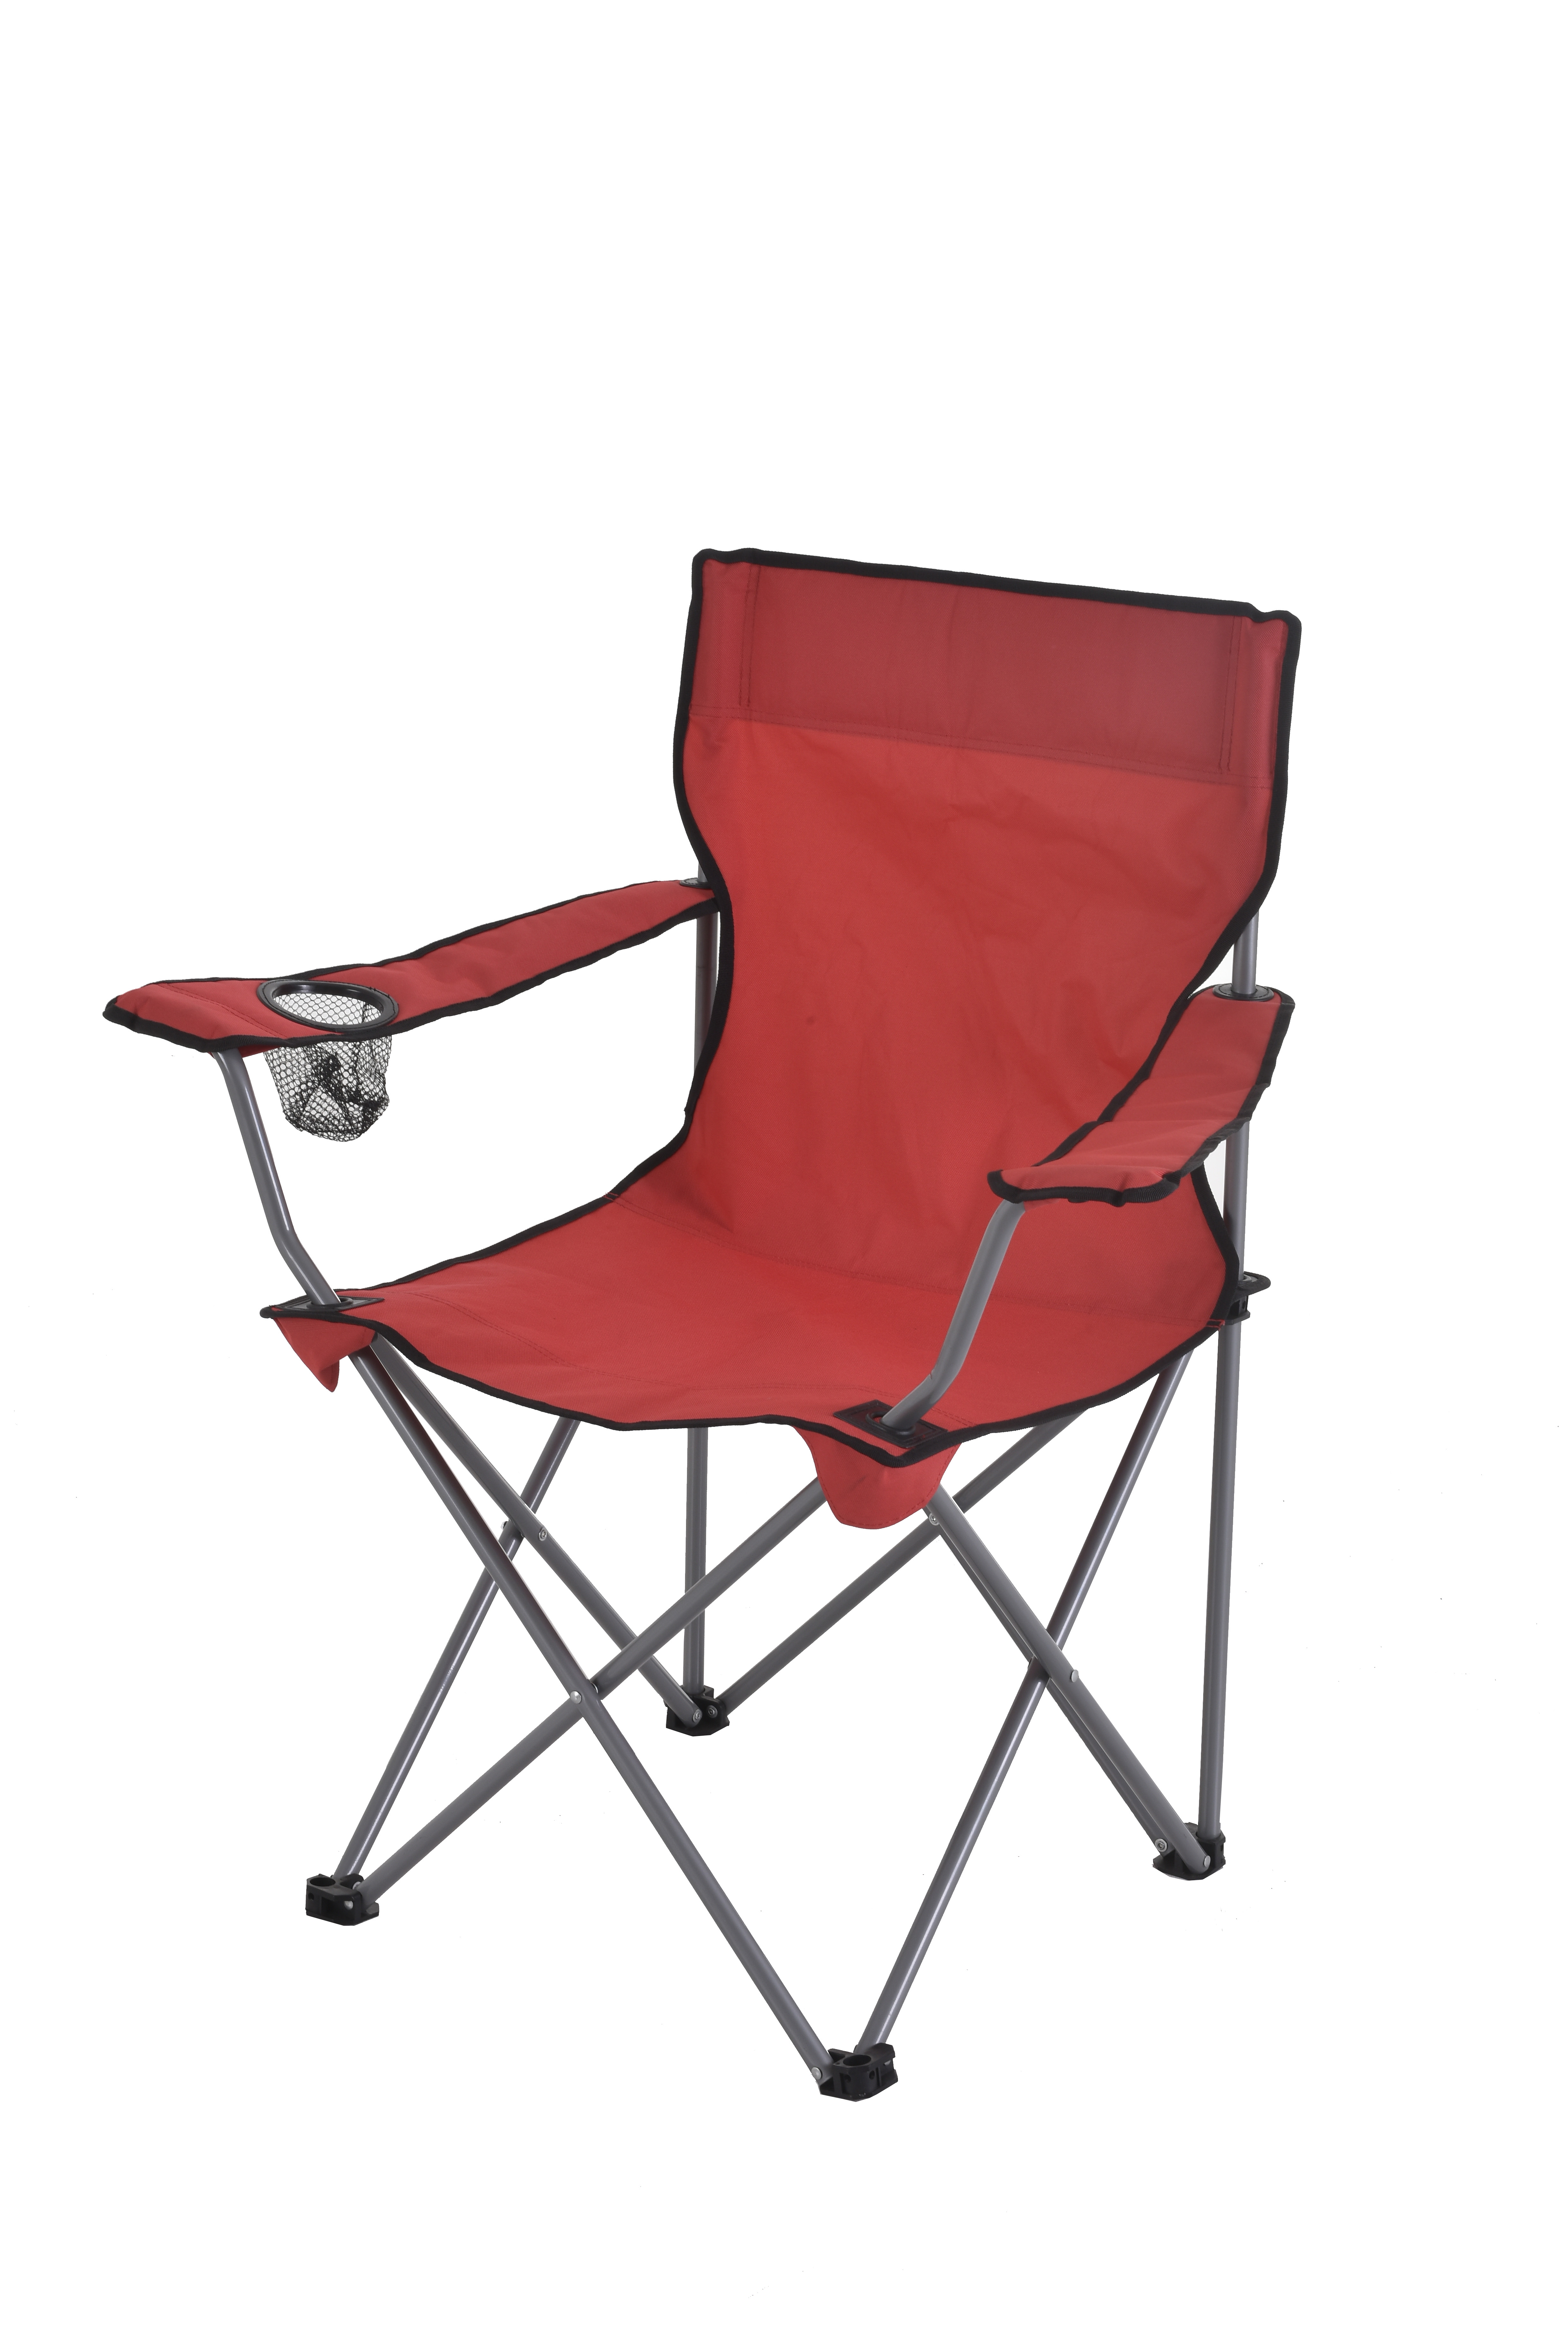 Folding Arm Chair Beach Chair camping chair with Cup Holder carry bag